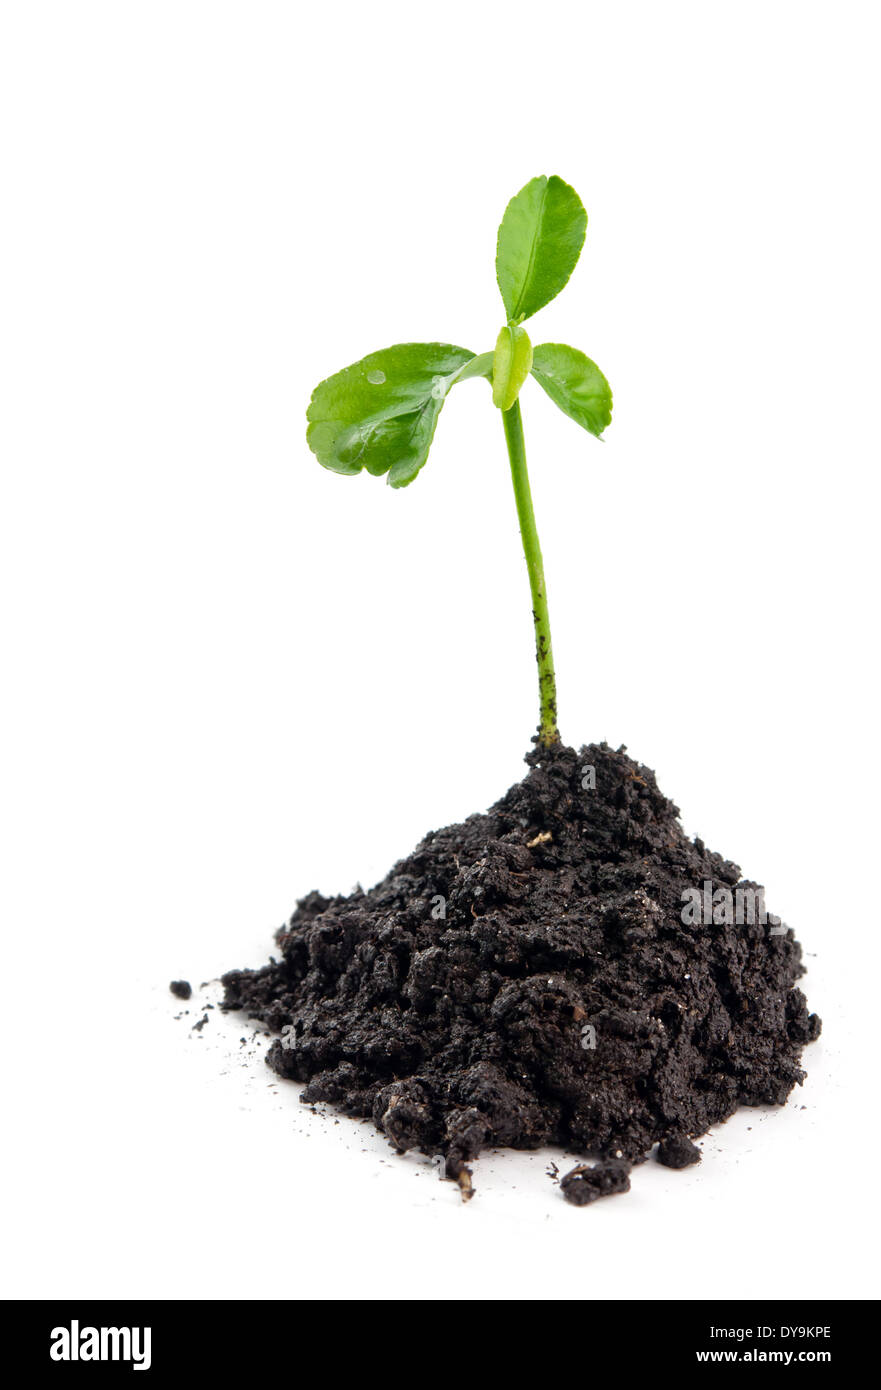 young plant on the white backgrounds Stock Photo